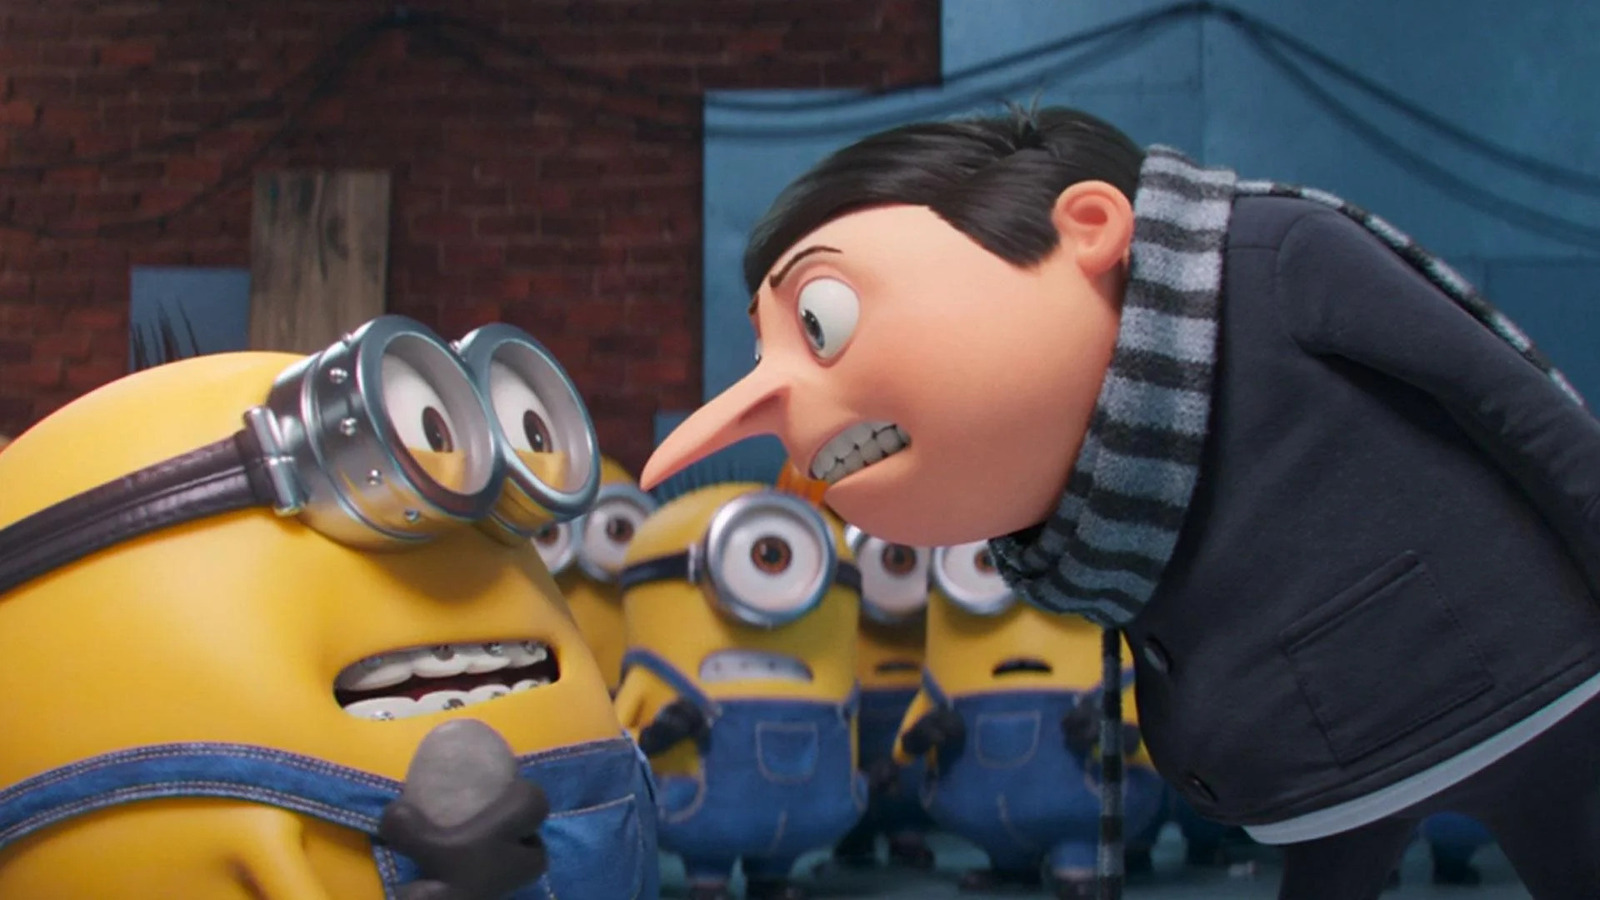 Various Artists - Minions: The Rise Of Gru -  Music